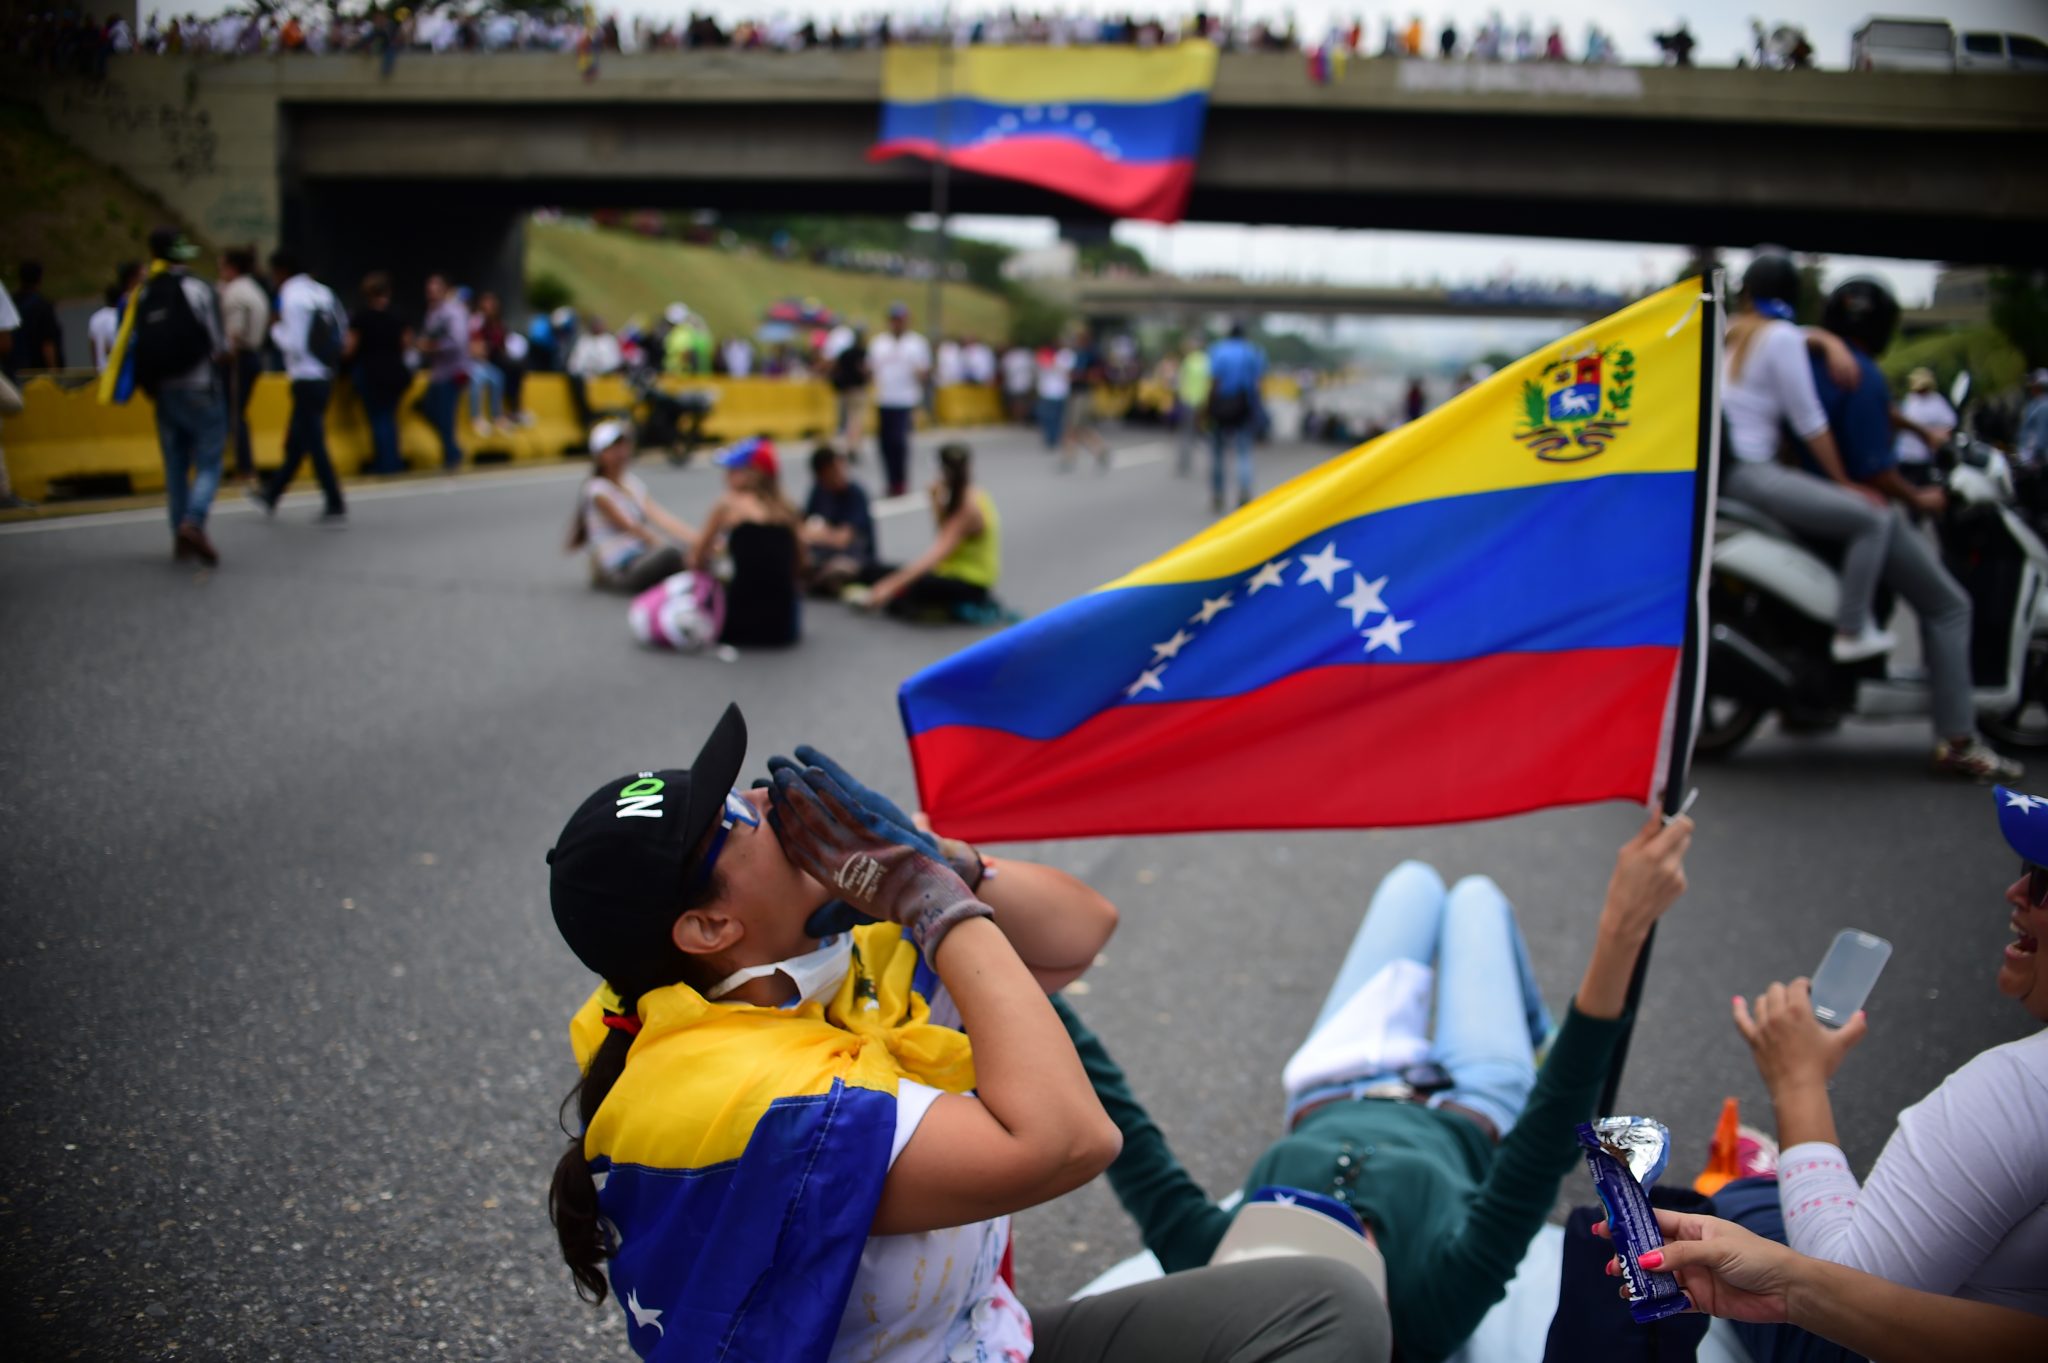 Venezuelan opposition activists organize a sit-in to block the Francisco Fajardo motorway in Caracas, on April 24, 2017. Protesters plan Monday to block Venezuela's main roads including the capital's biggest motorway, triggering fears of further violence after three weeks of unrest left 21 people dead. / AFP PHOTO / RONALDO SCHEMIDT